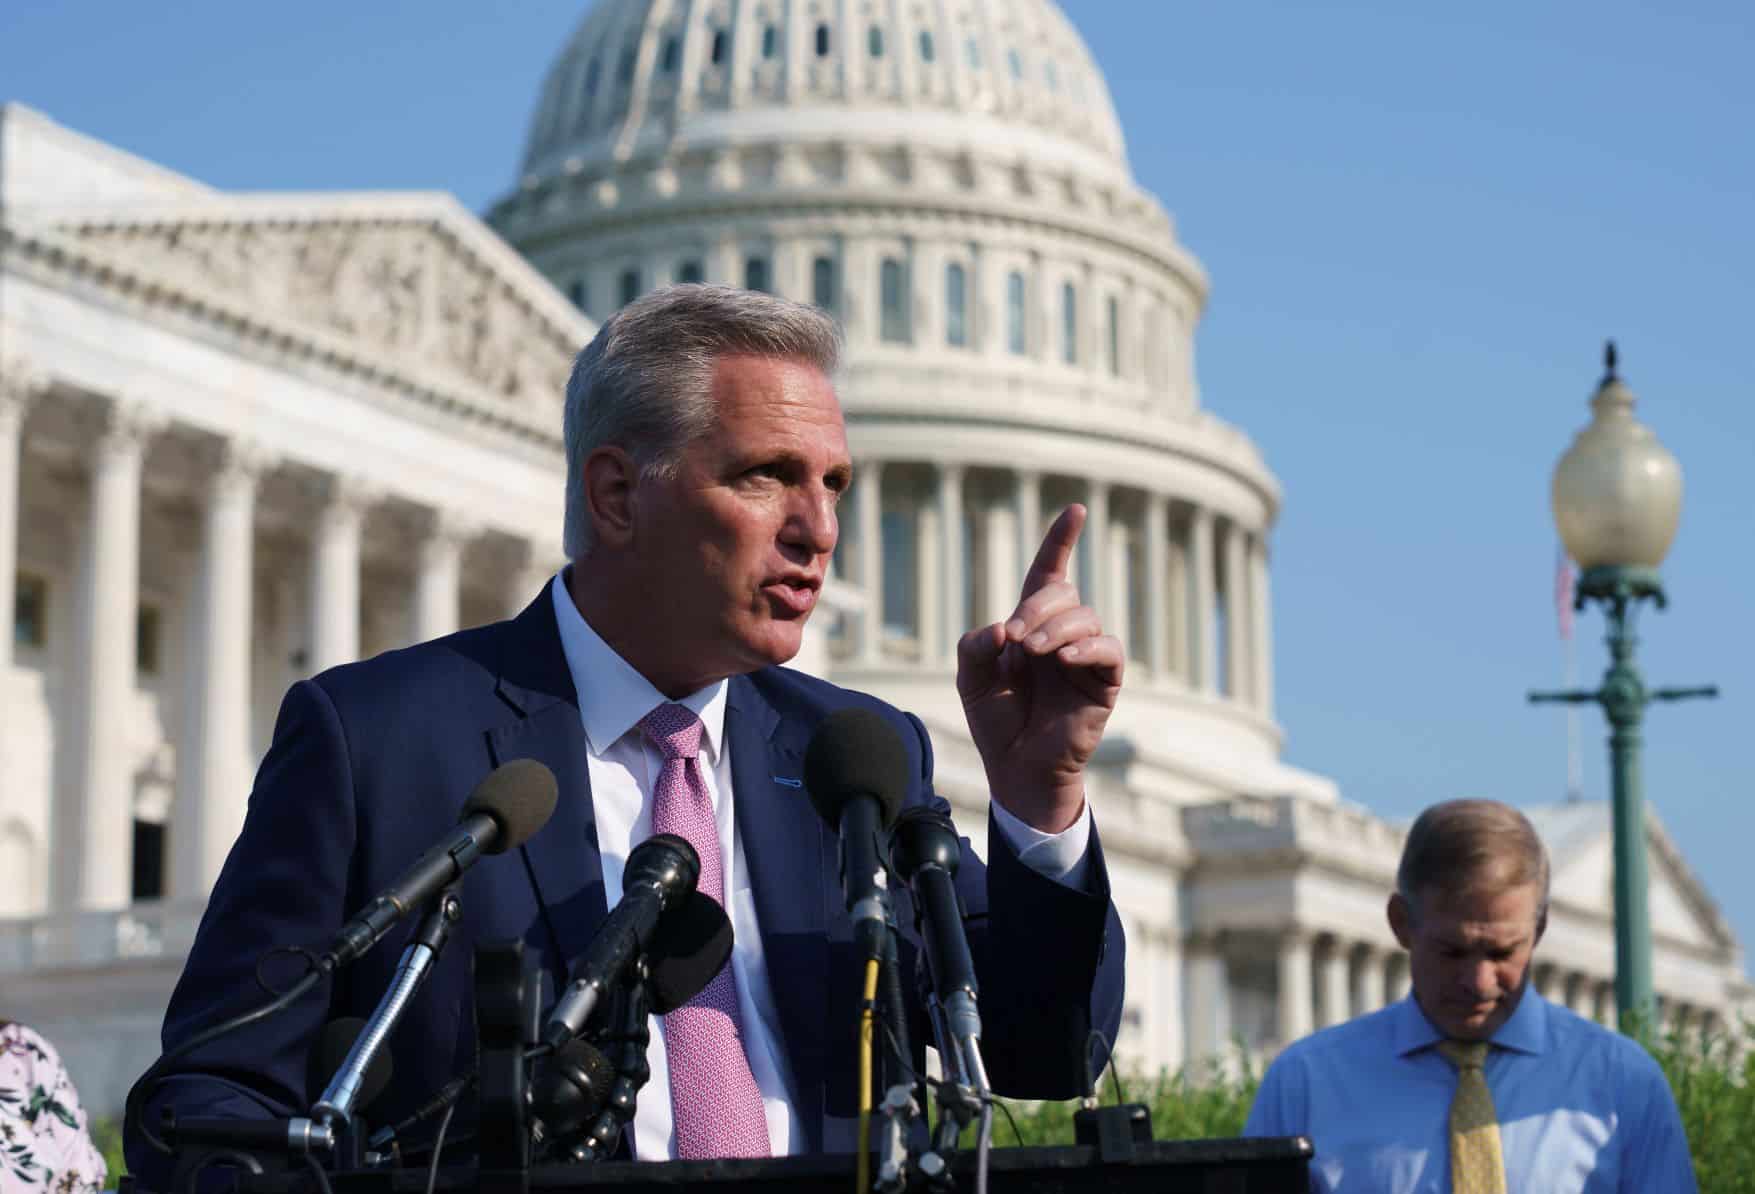 GOP Leader McCarthy Says He Won’t Cooperate With Jan 6 Panel